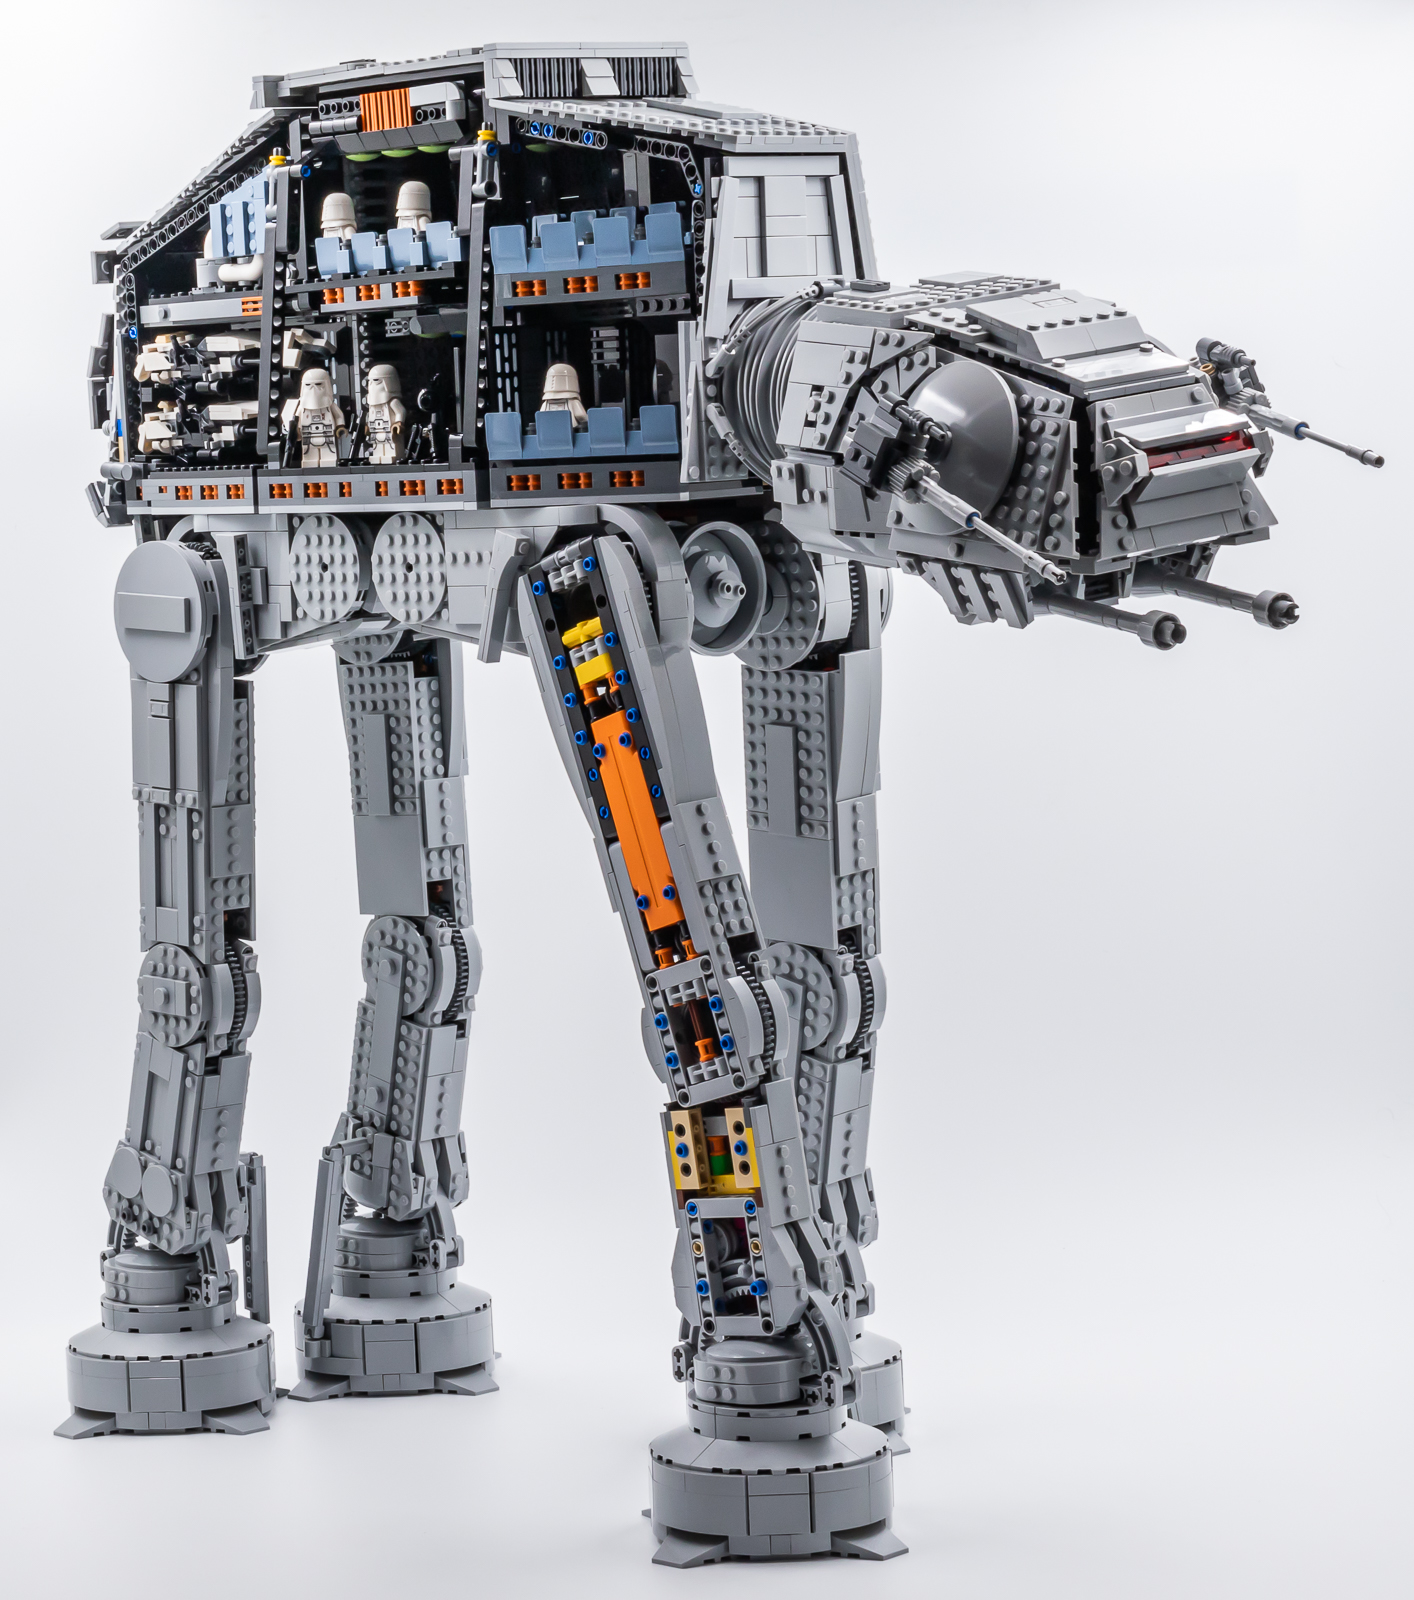 LEGO Star Wars UCS AT-AT (75313) Officially Announced - The Brick Fan